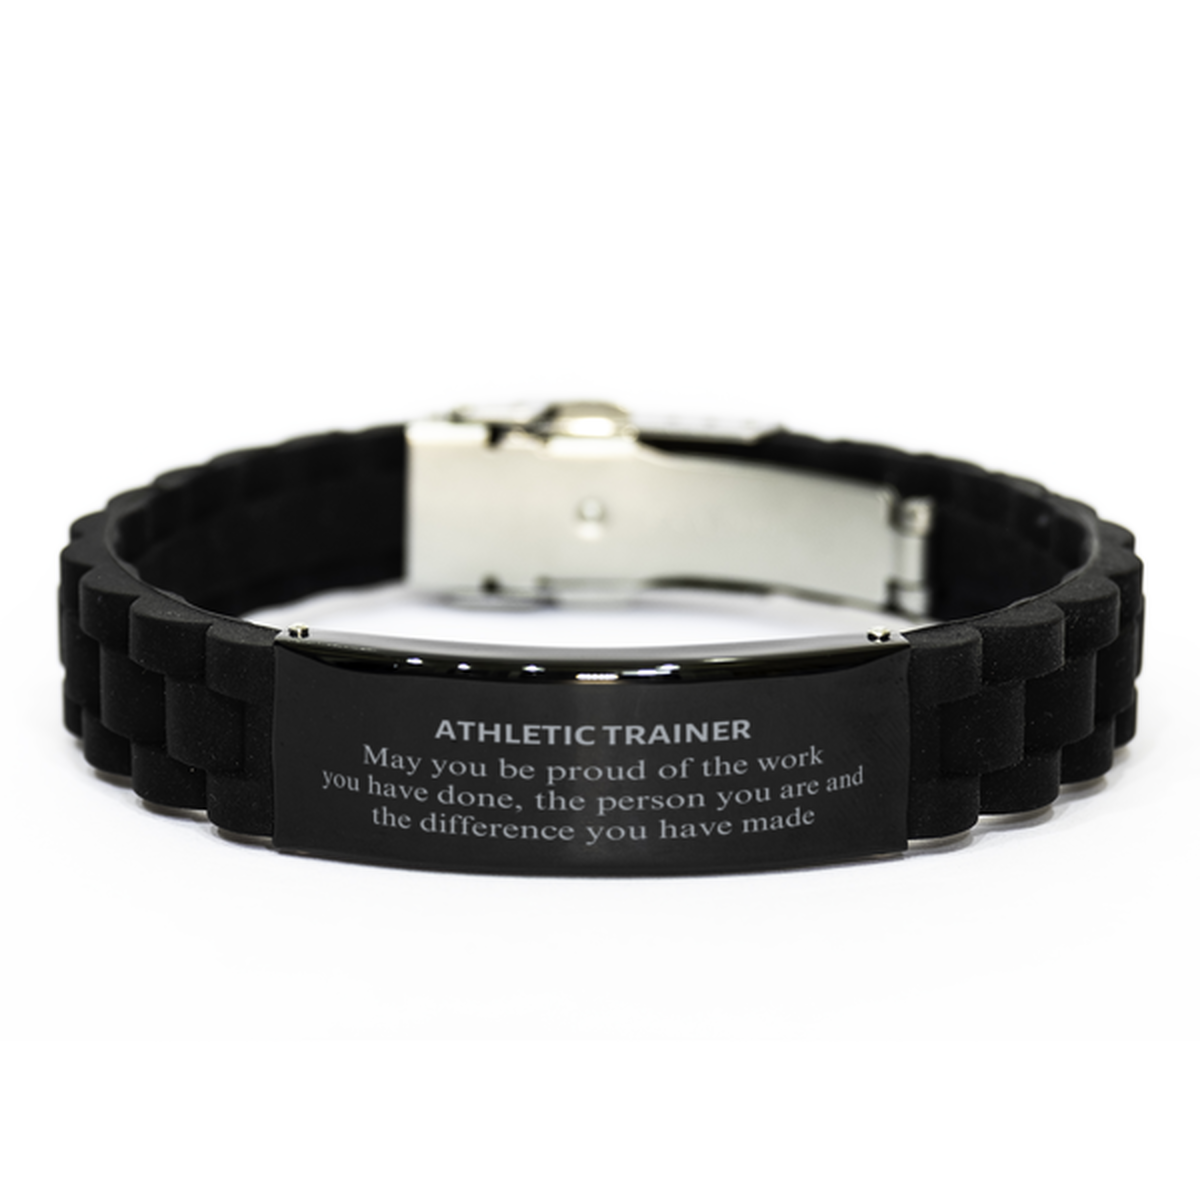 Athletic Trainer May you be proud of the work you have done, Retirement Athletic Trainer Black Glidelock Clasp Bracelet for Colleague Appreciation Gifts Amazing for Athletic Trainer